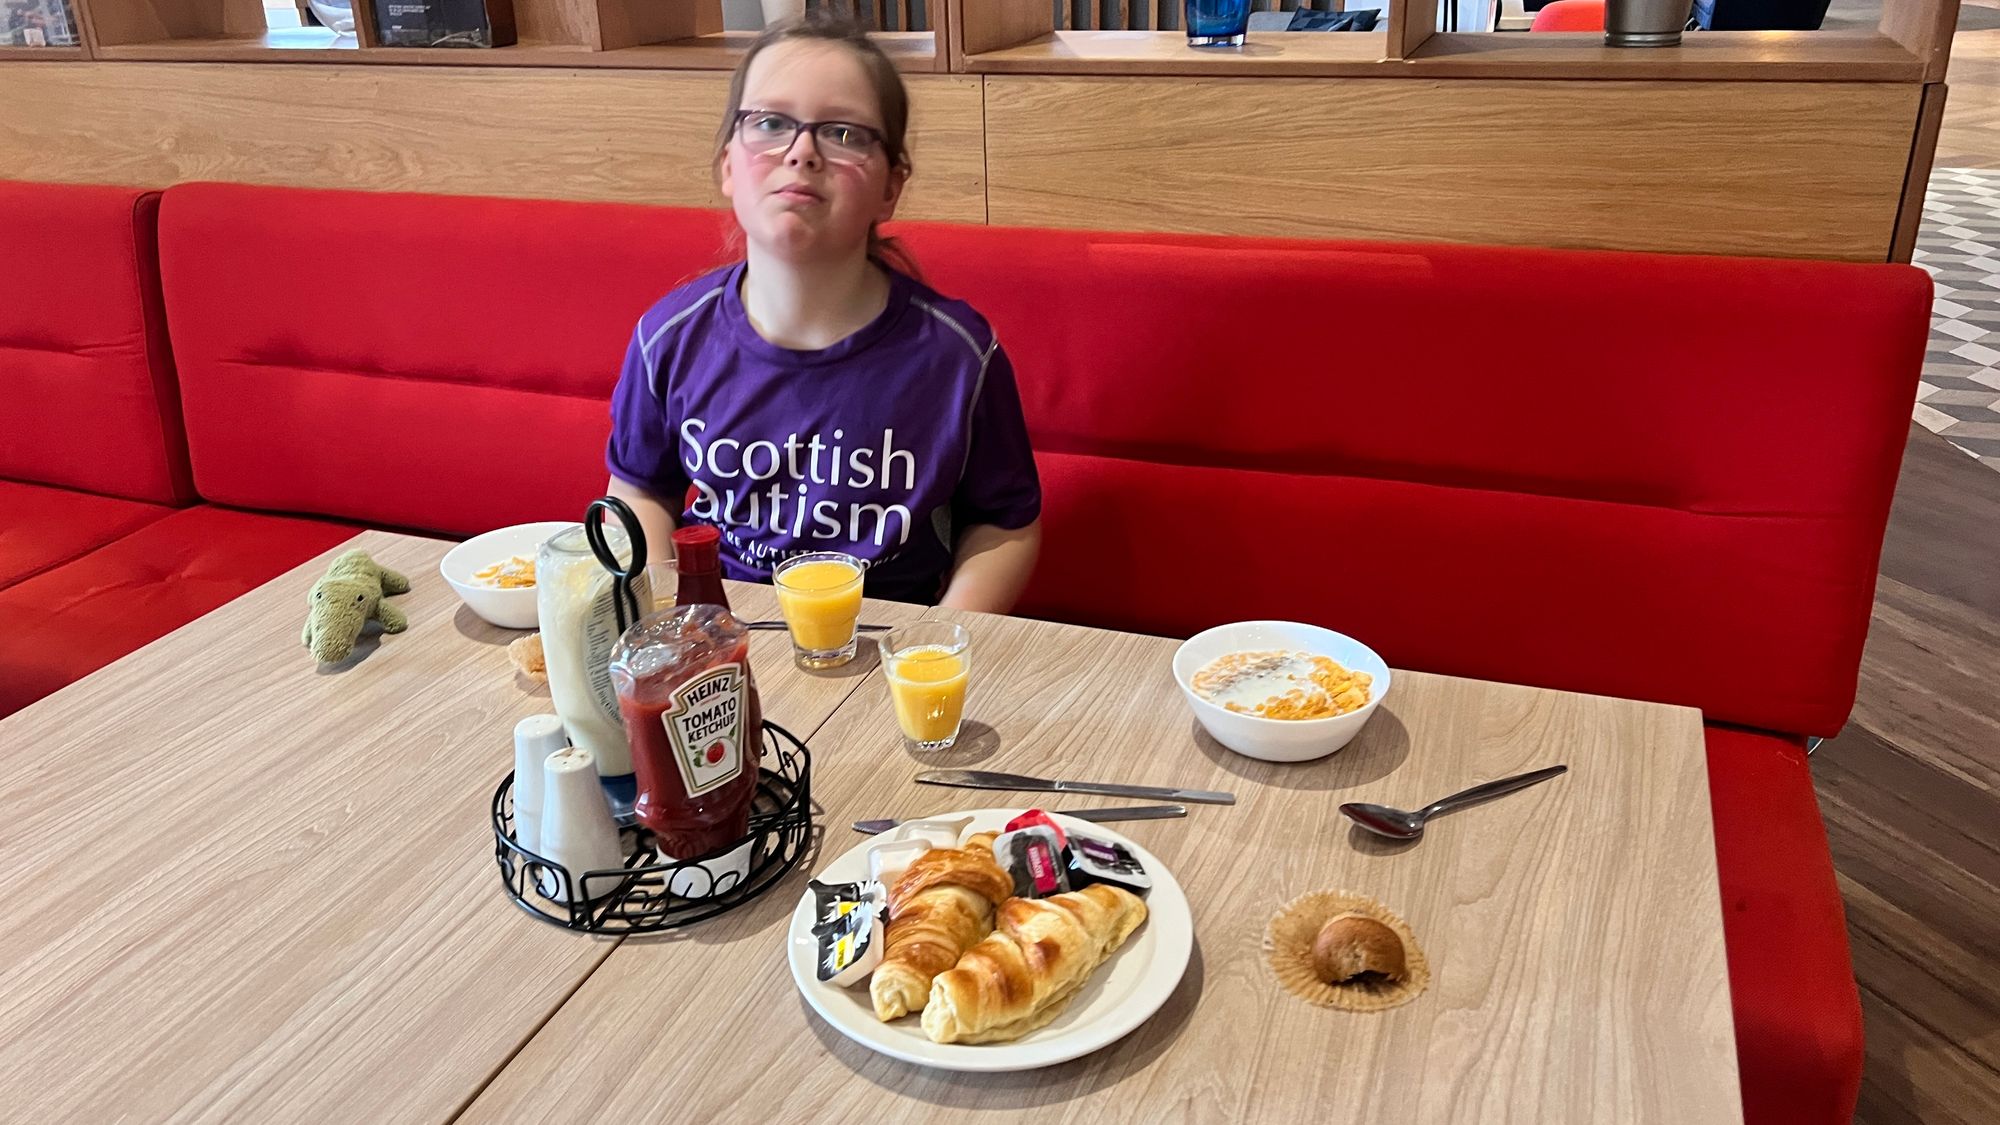 We had a continental breakfast and it was good. We left not being able to eat any more!